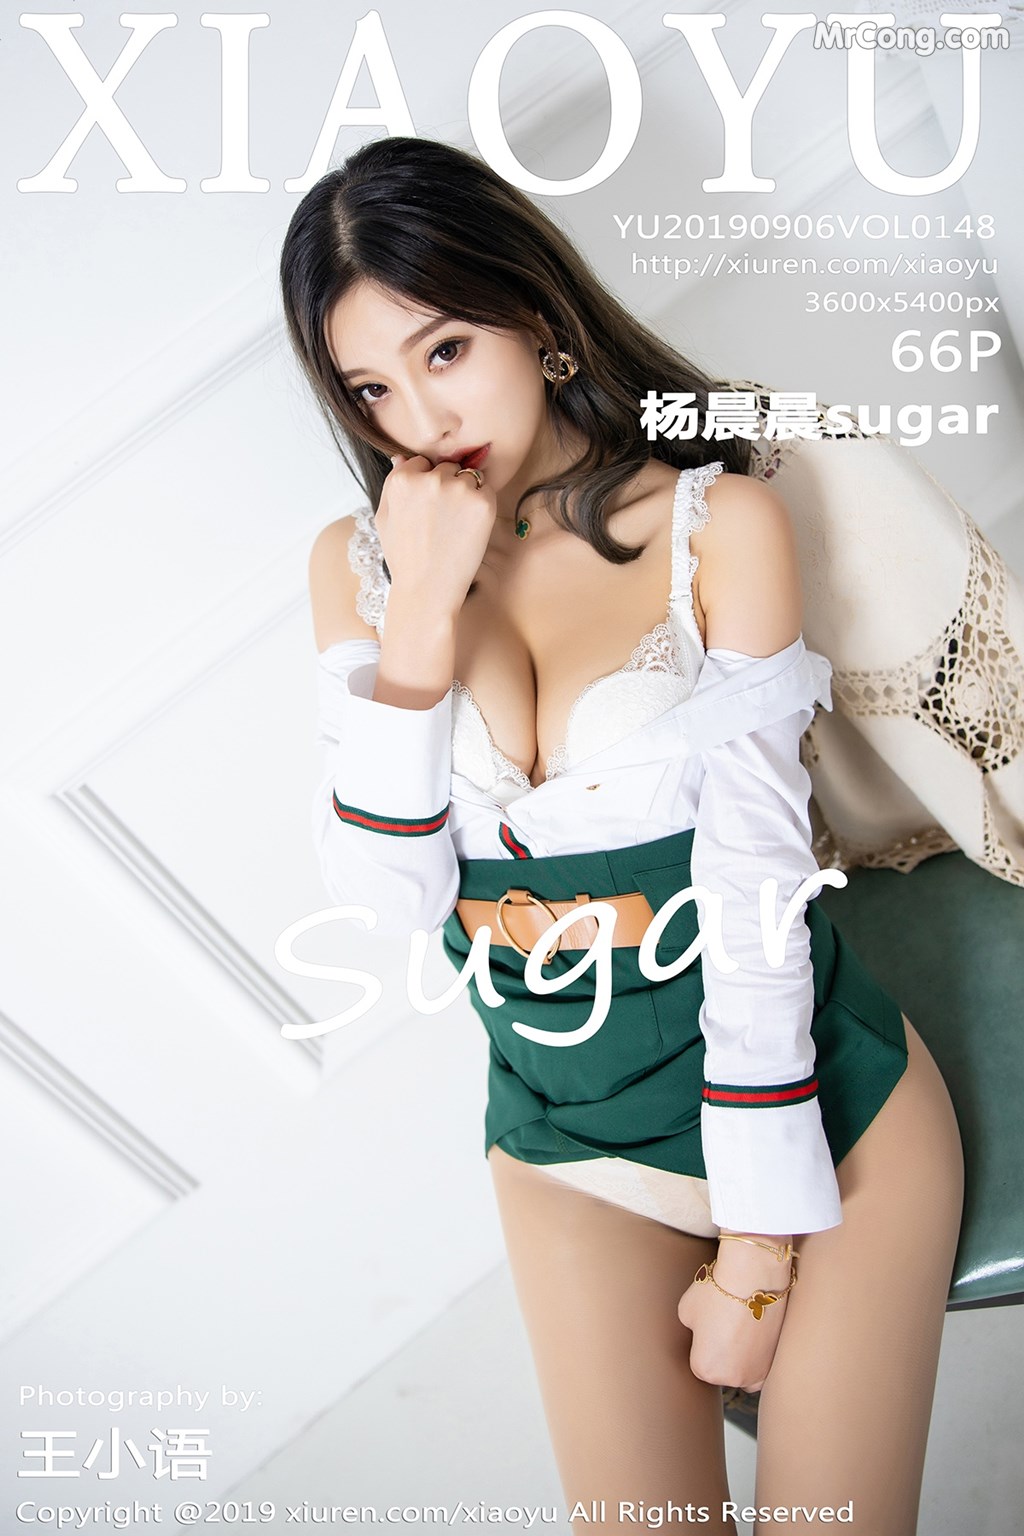 XiaoYu Vol.148: Yang Chen Chen (杨晨晨 sugar) (67 pictures)